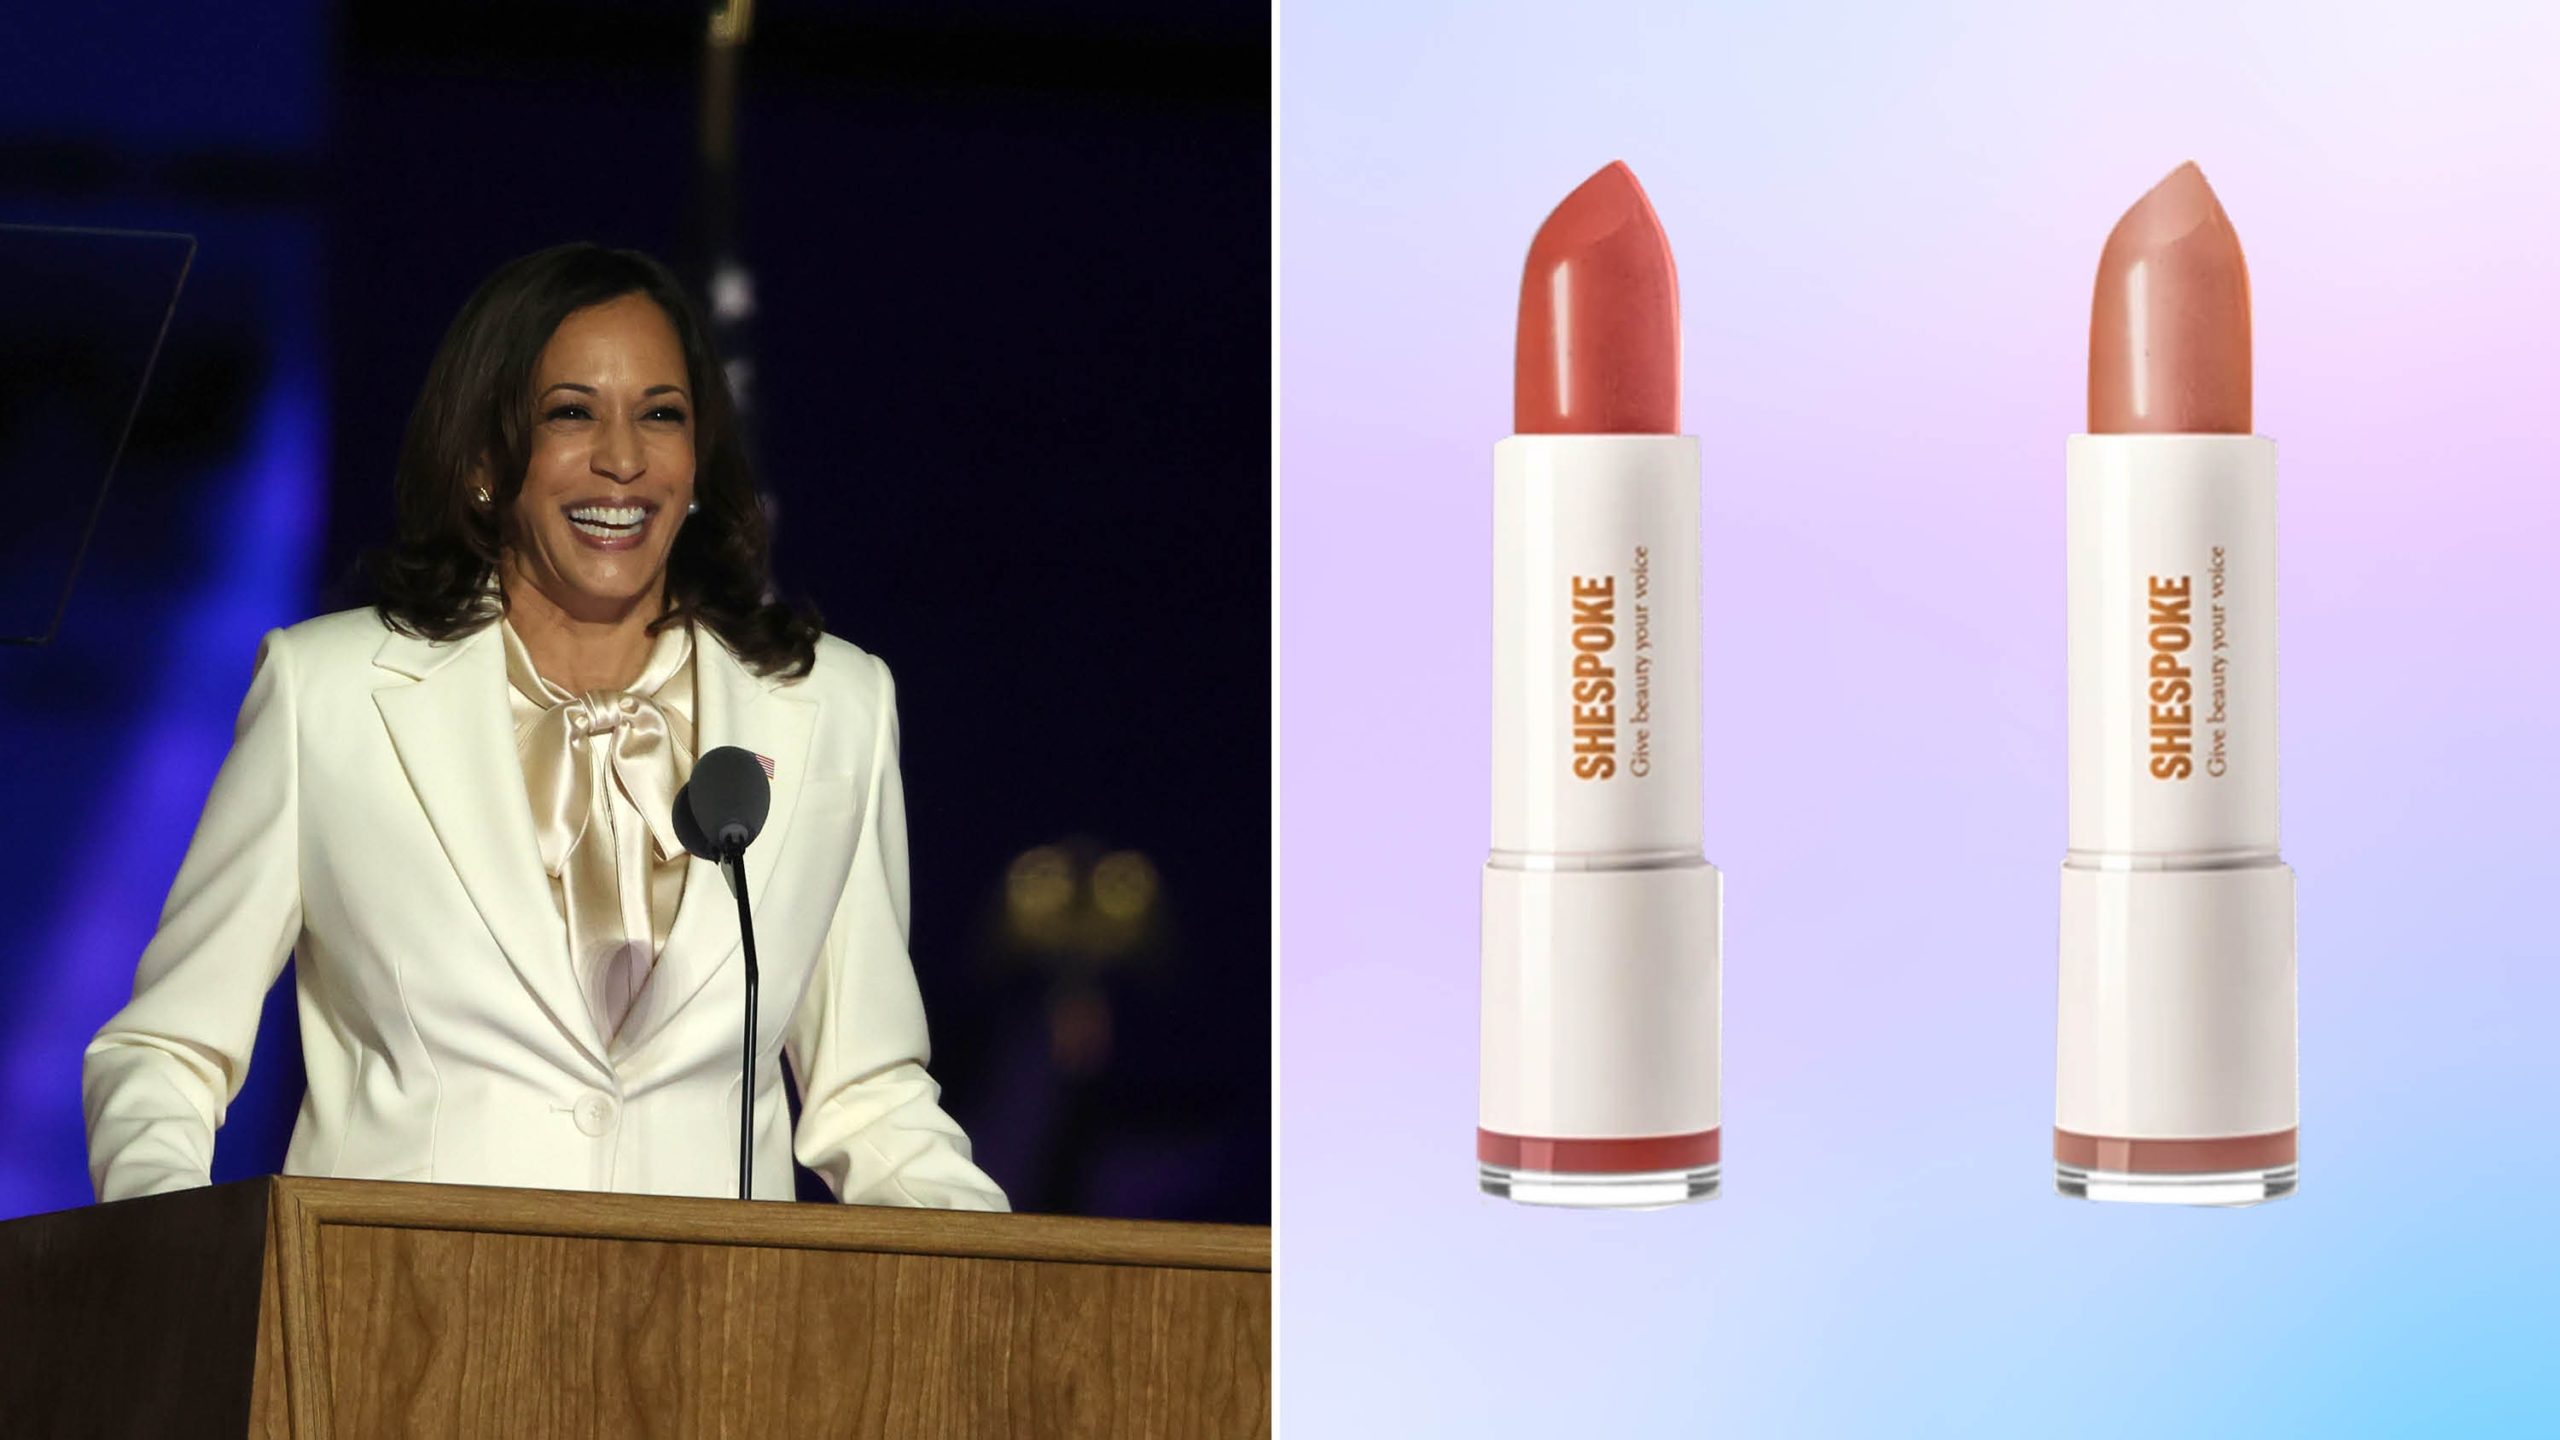 SheSpoke Launches Limited-Edition “I’m Speaking” Lipstick Collection